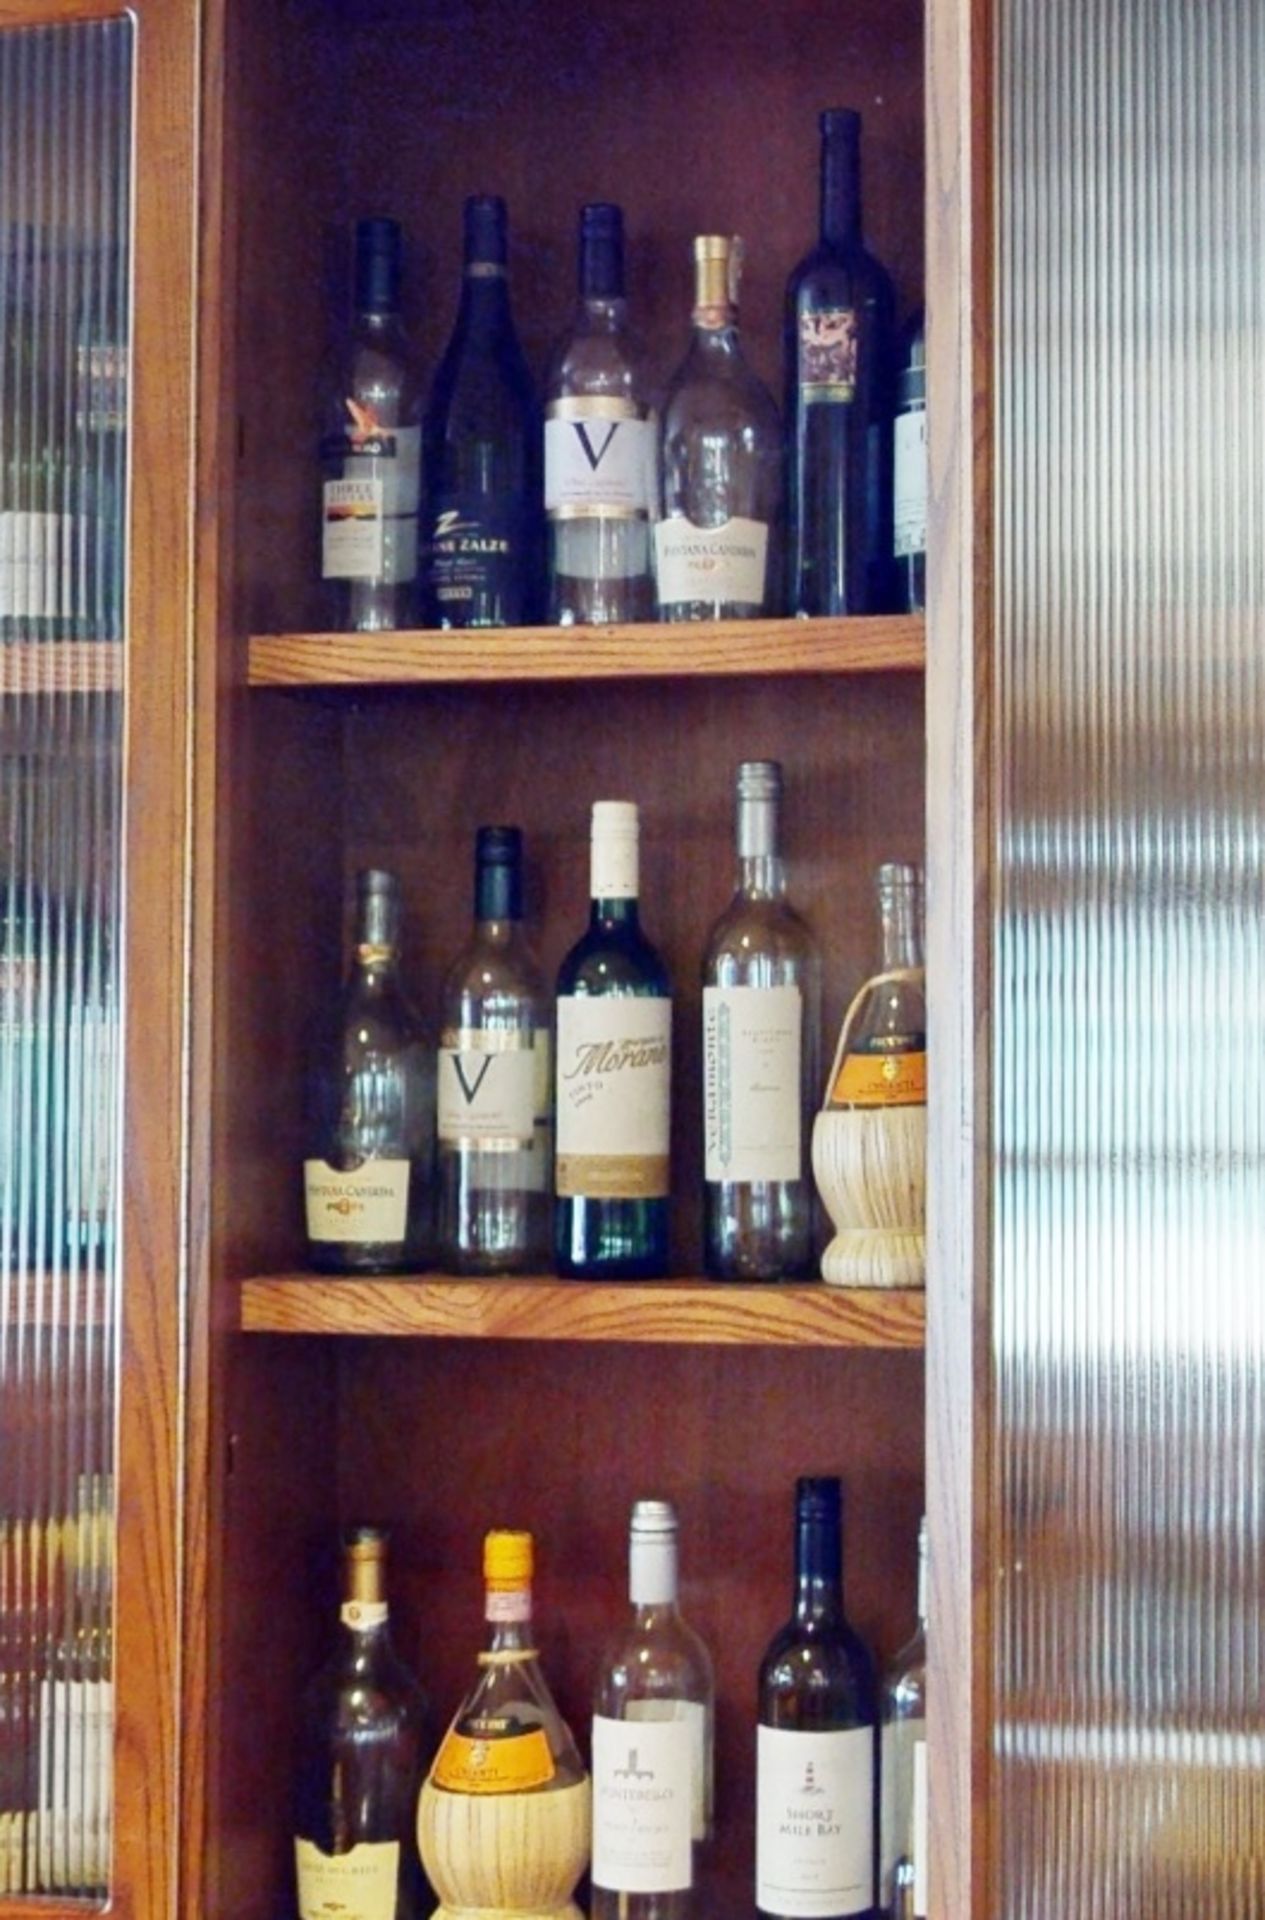 1 x Illuminated Wine Bottle Display Cabinet With Ribbed Glass Doors - Wooden Carcass With Six Doors - Image 3 of 4